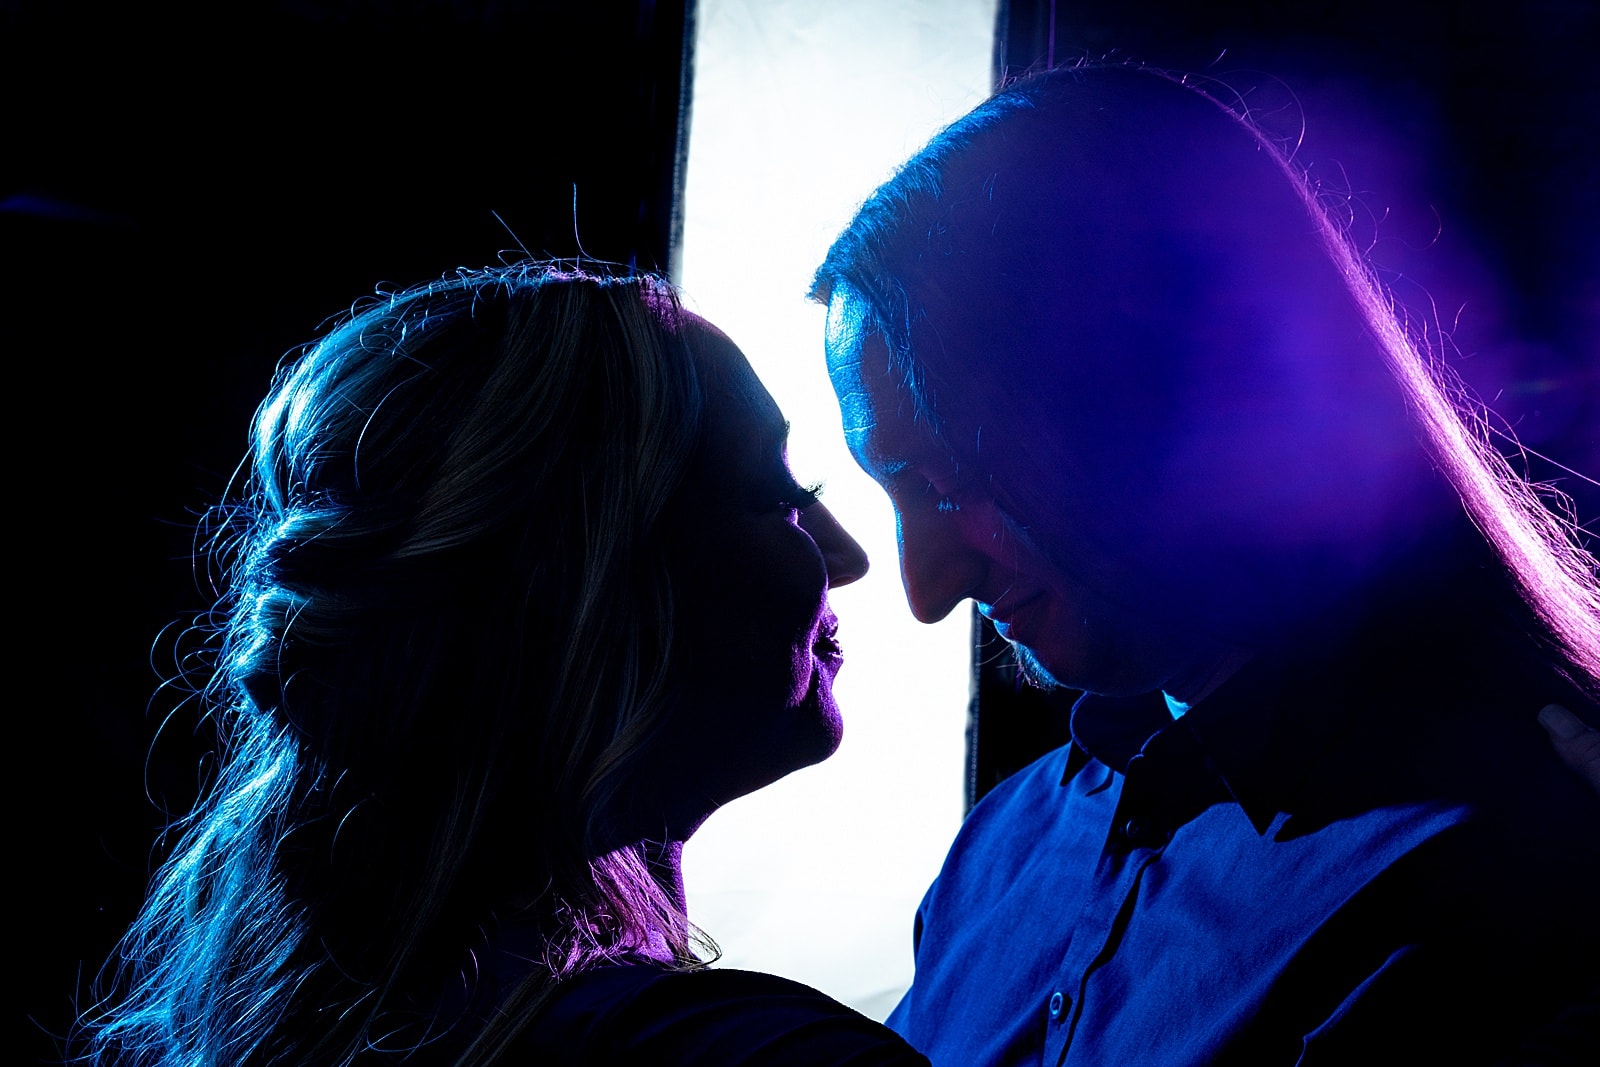 after dark engagement photo session - creative lighting and dramatic portraits